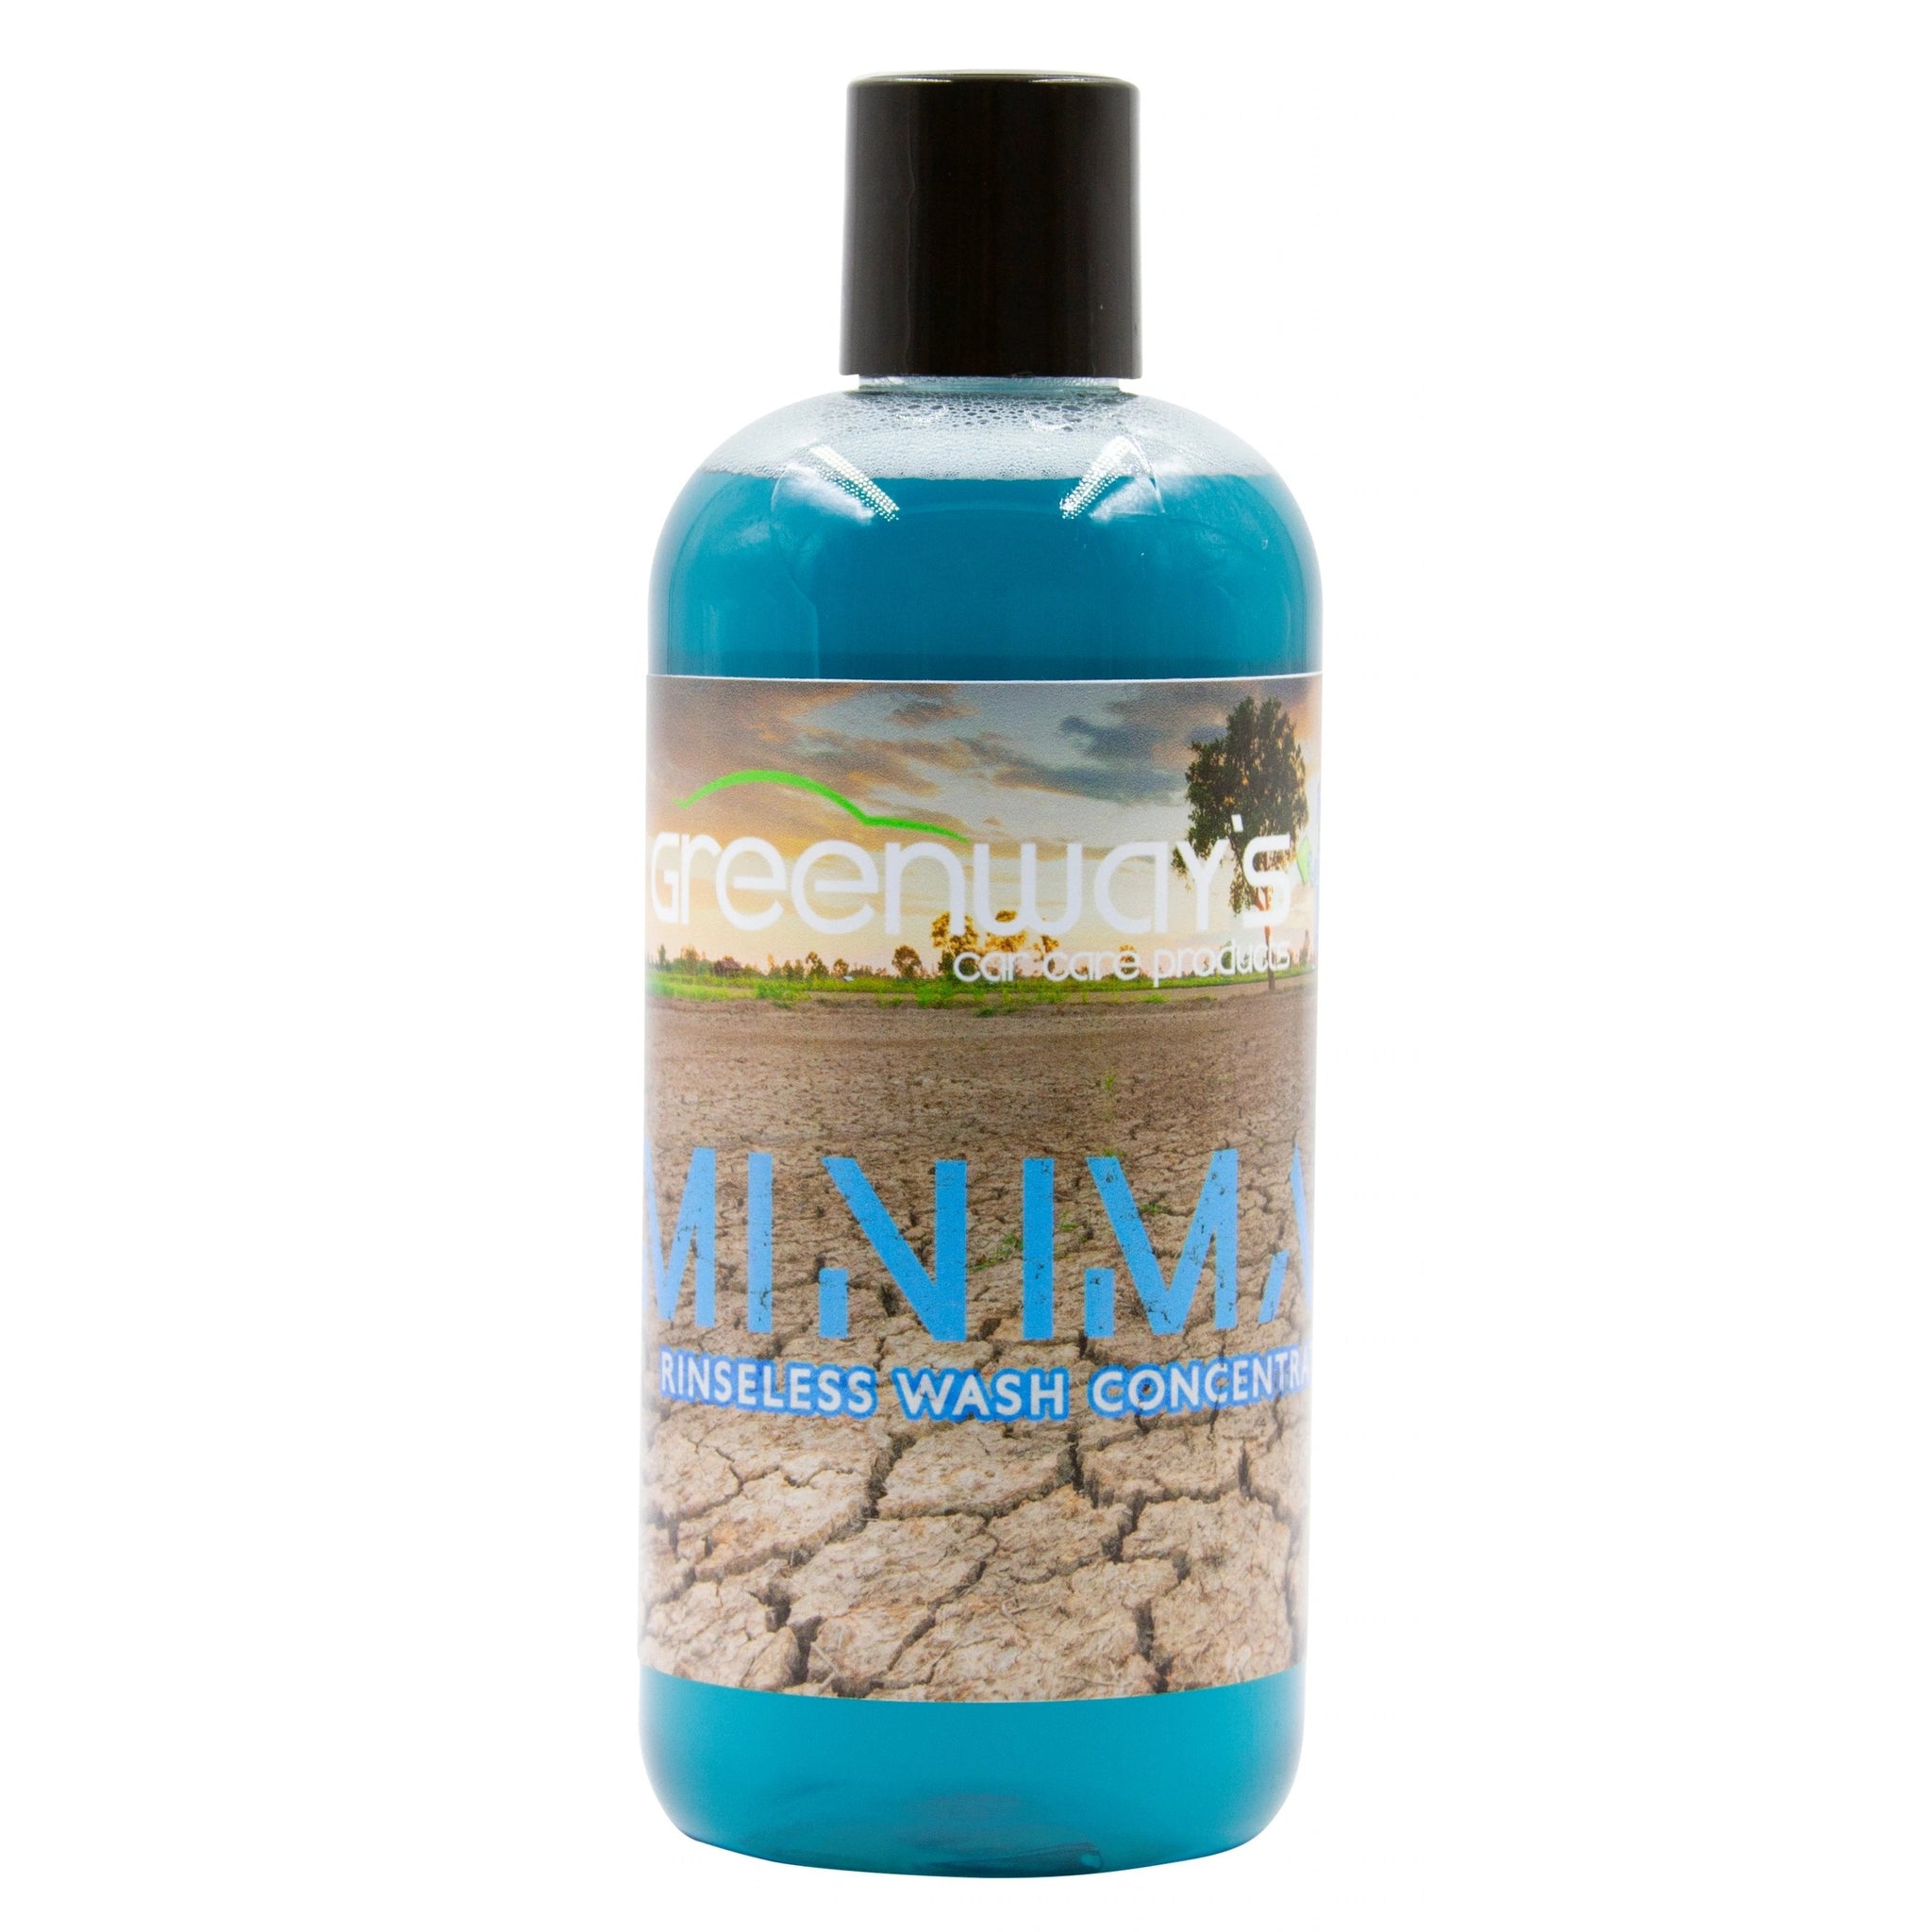 Greenway's Minimal Rinseless Wash Concentrate, waterless car soap, clay lubricant, interior detailer, glass cleaner, 16 ounces.